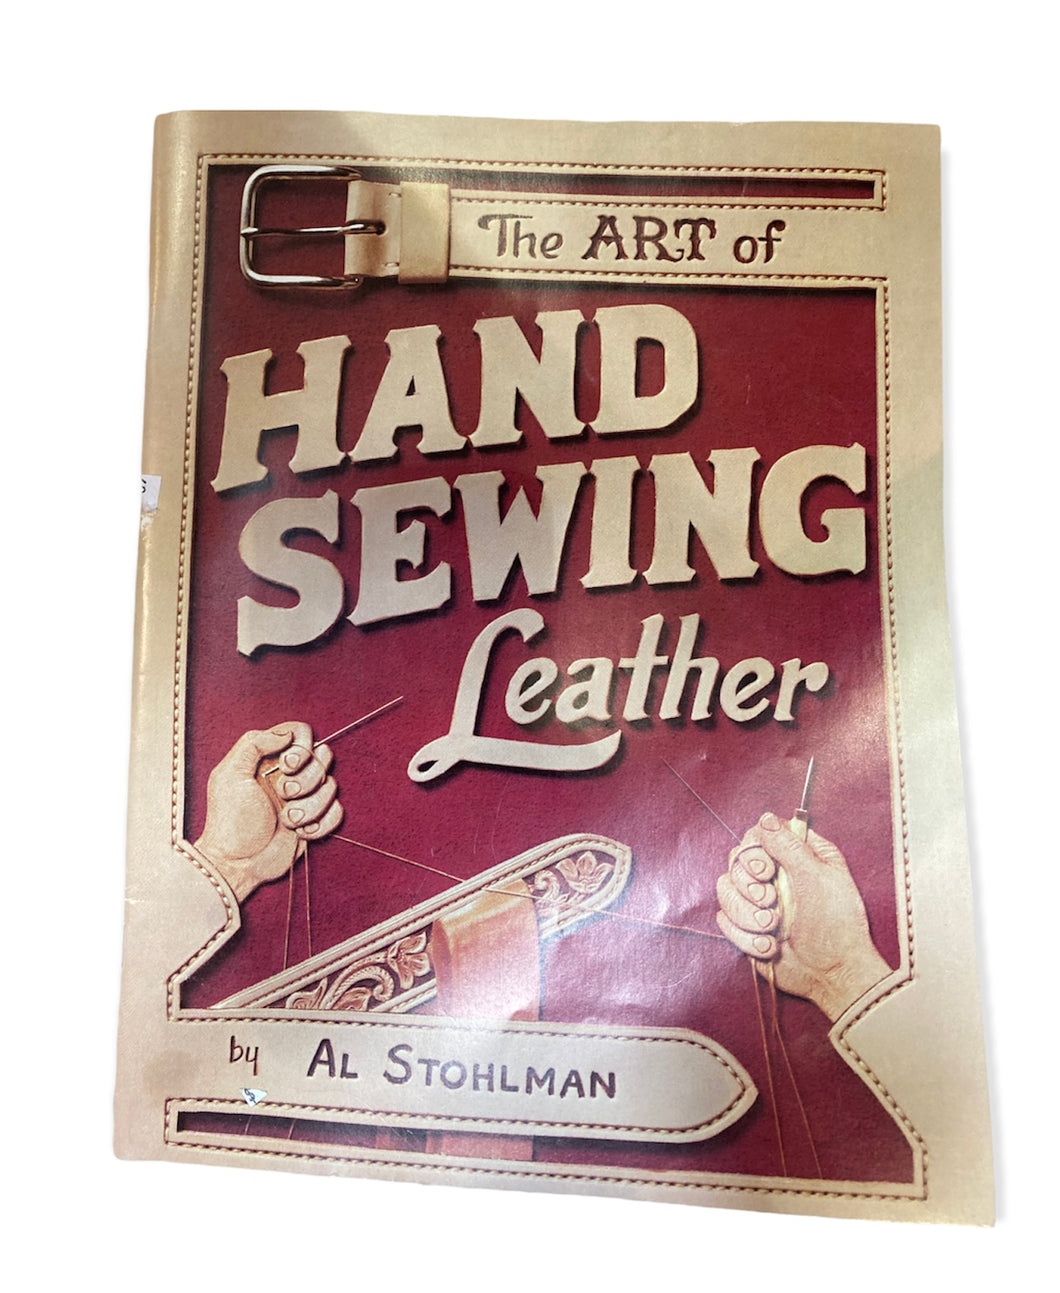 The Art of HandSewing Leather